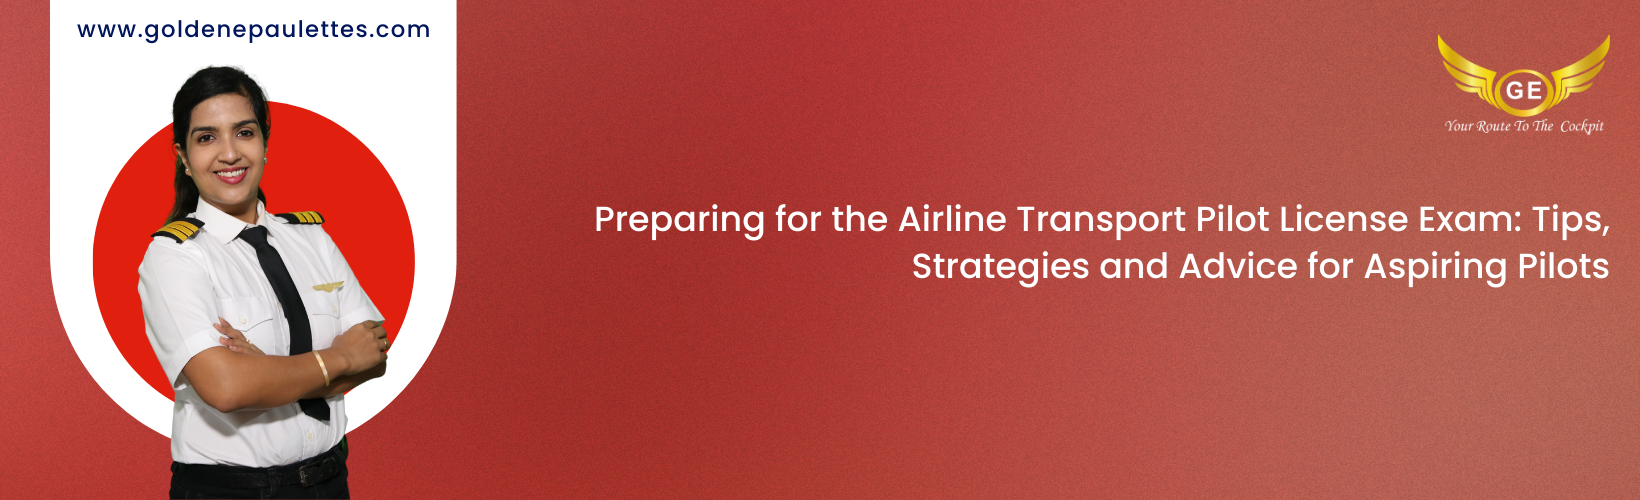 Interview Tips for Radio Aids and Instruments Course in Airline Transport Pilot License